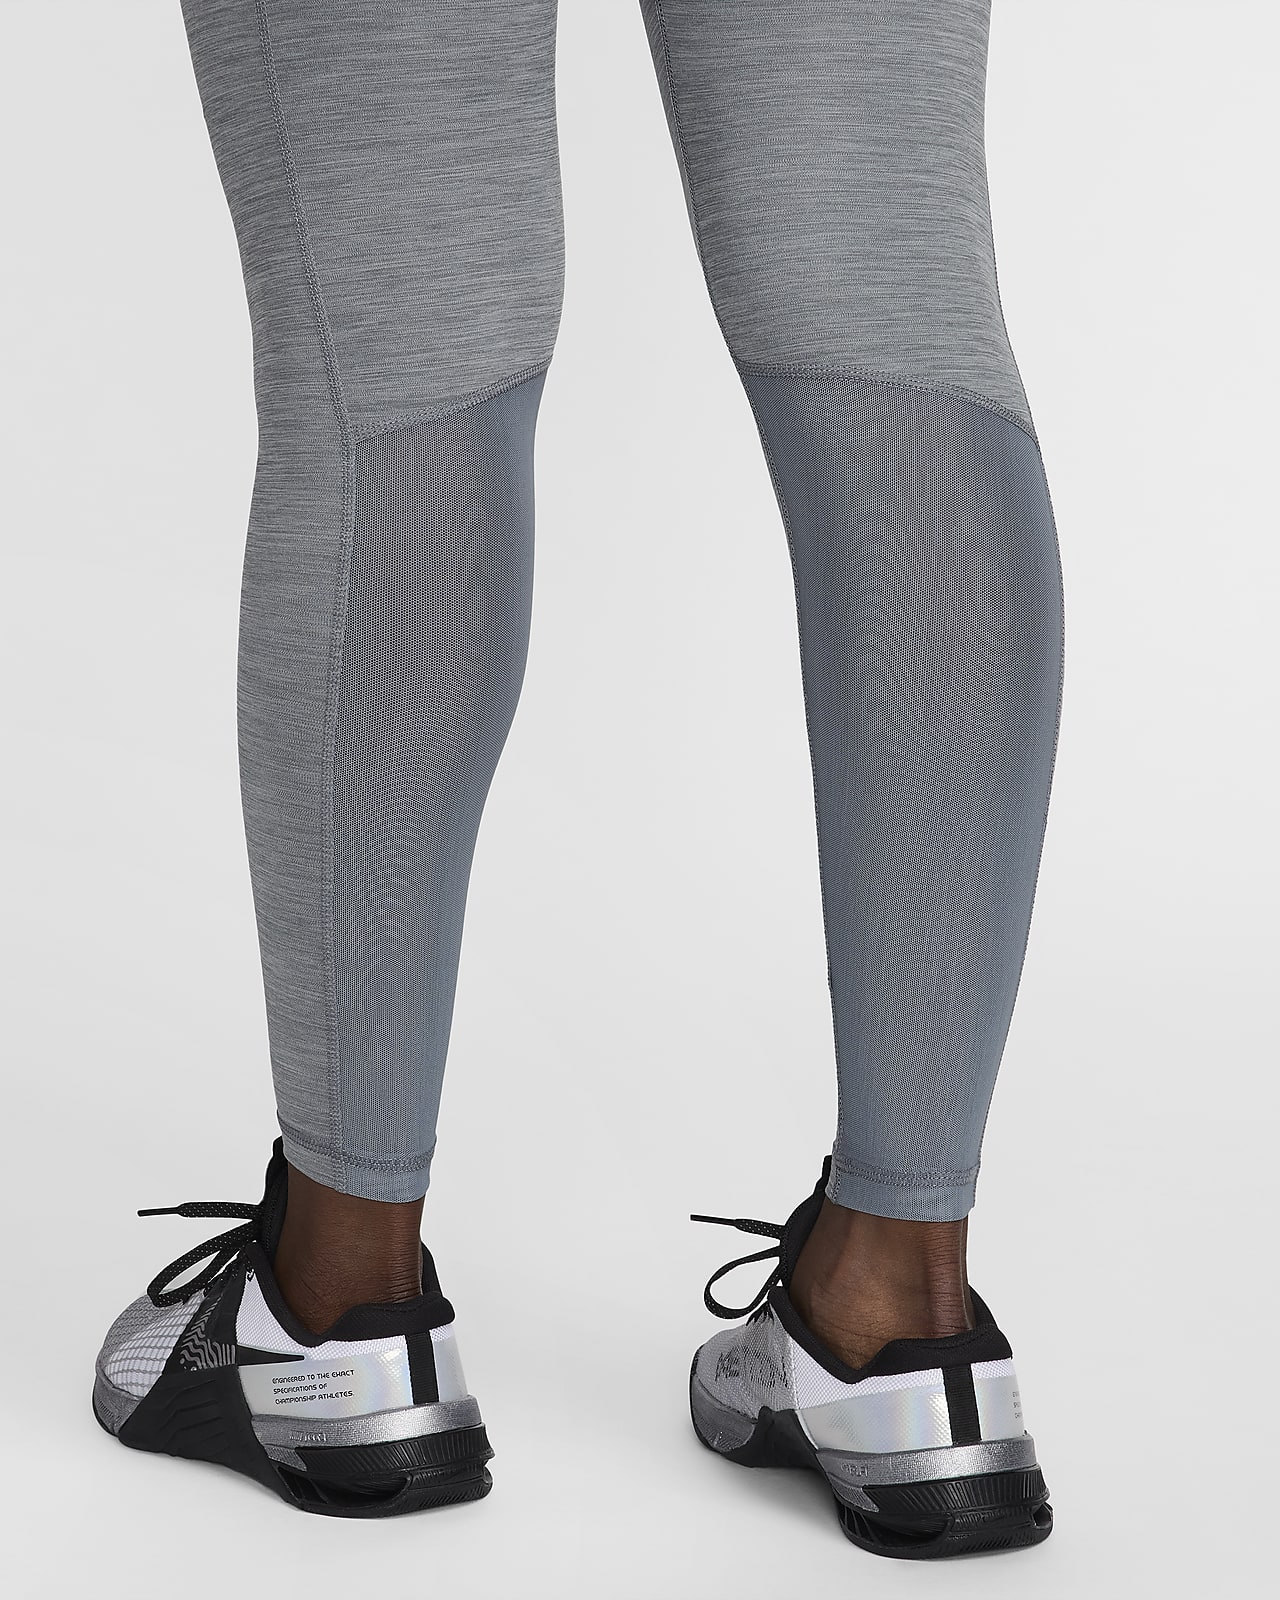 Nike Leg-A-See Just Do It Legging  Just do it leggings, Adidas women,  Sport outfits